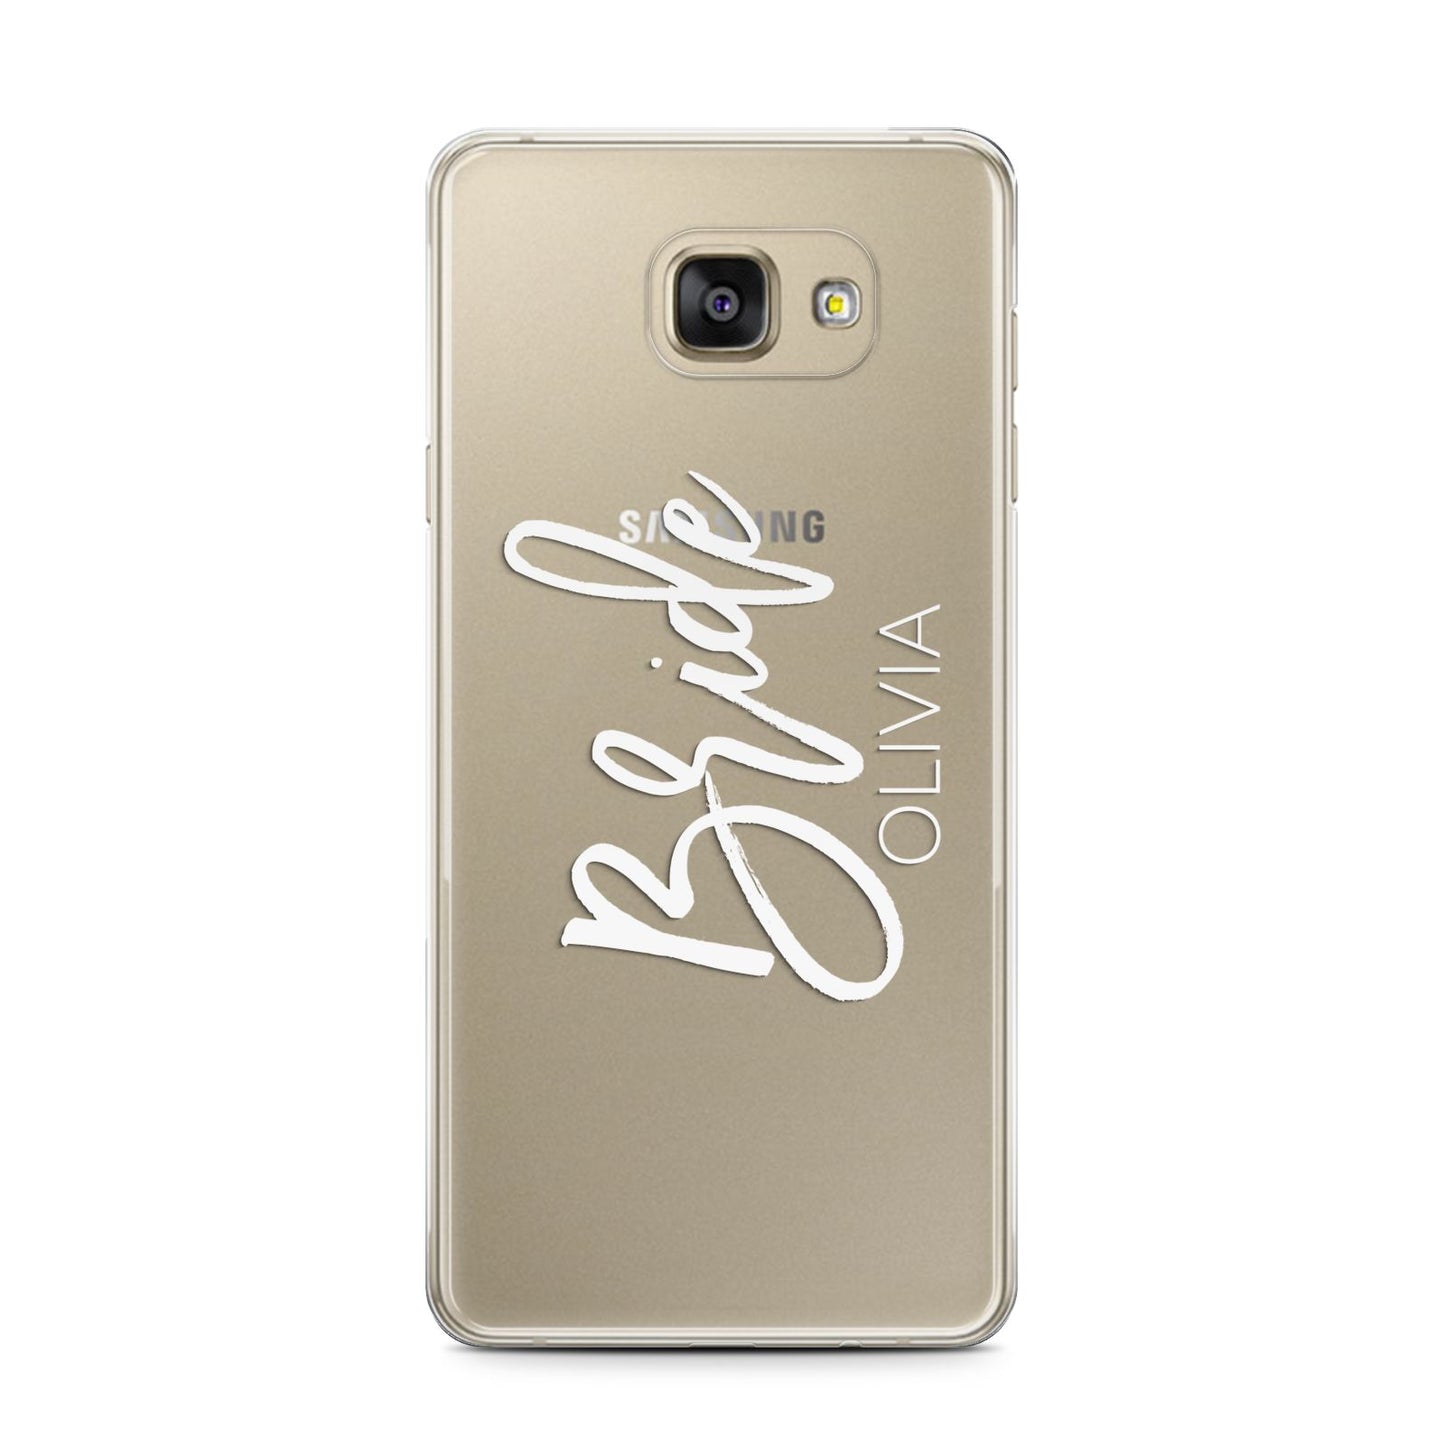 Personalised Bride Samsung Galaxy A7 2016 Case on gold phone